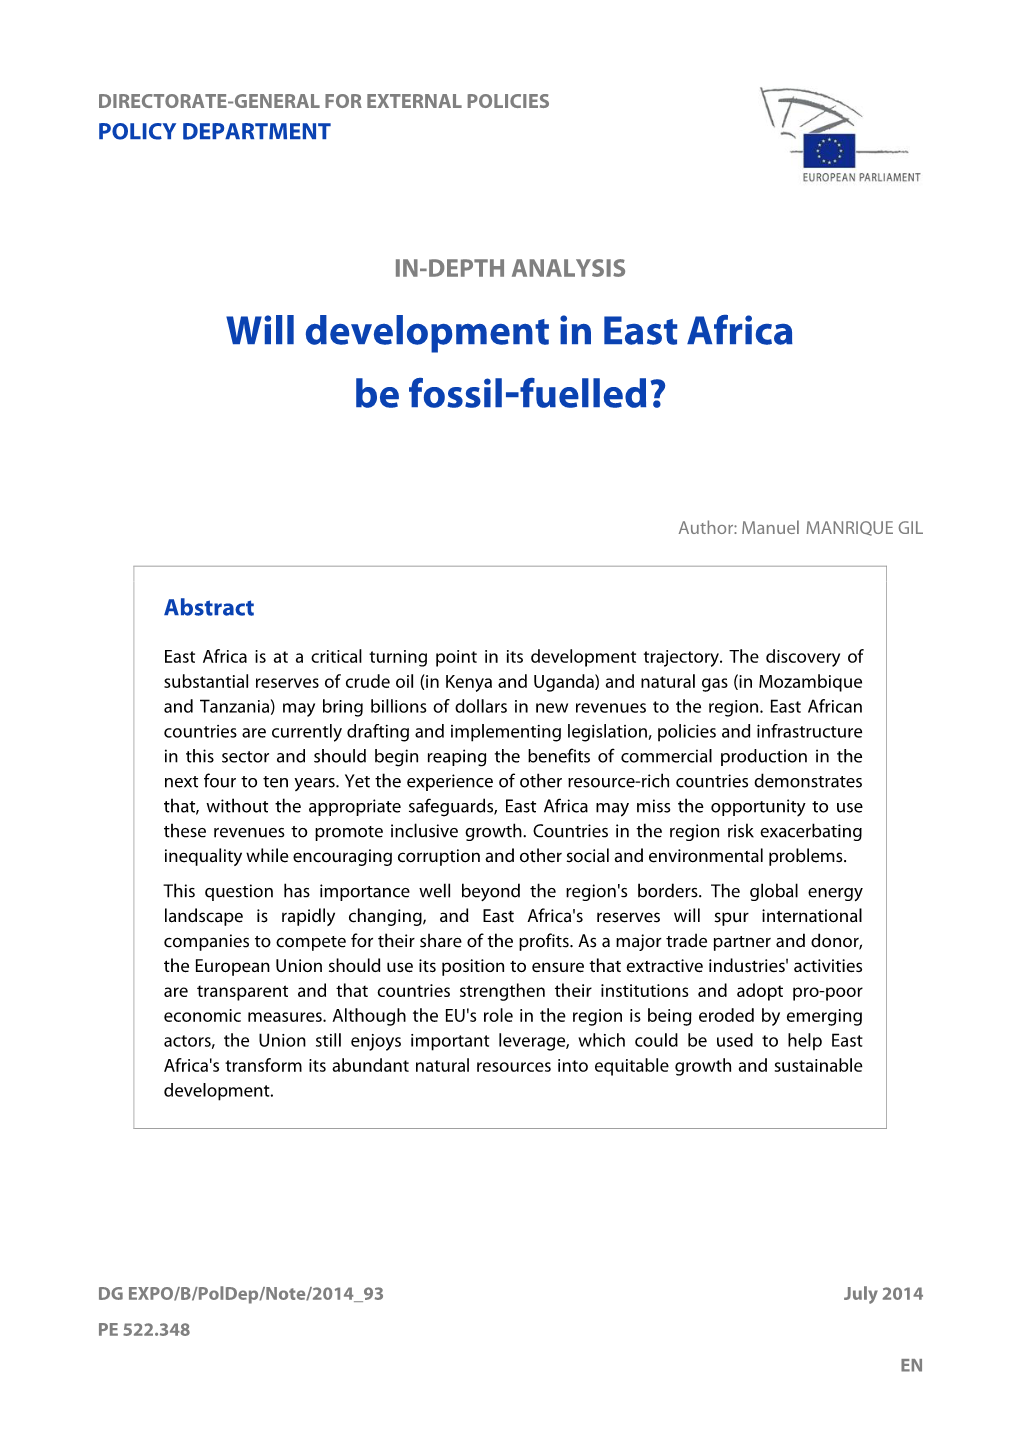 Will Development in East Africa Be Fossil-Fuelled?